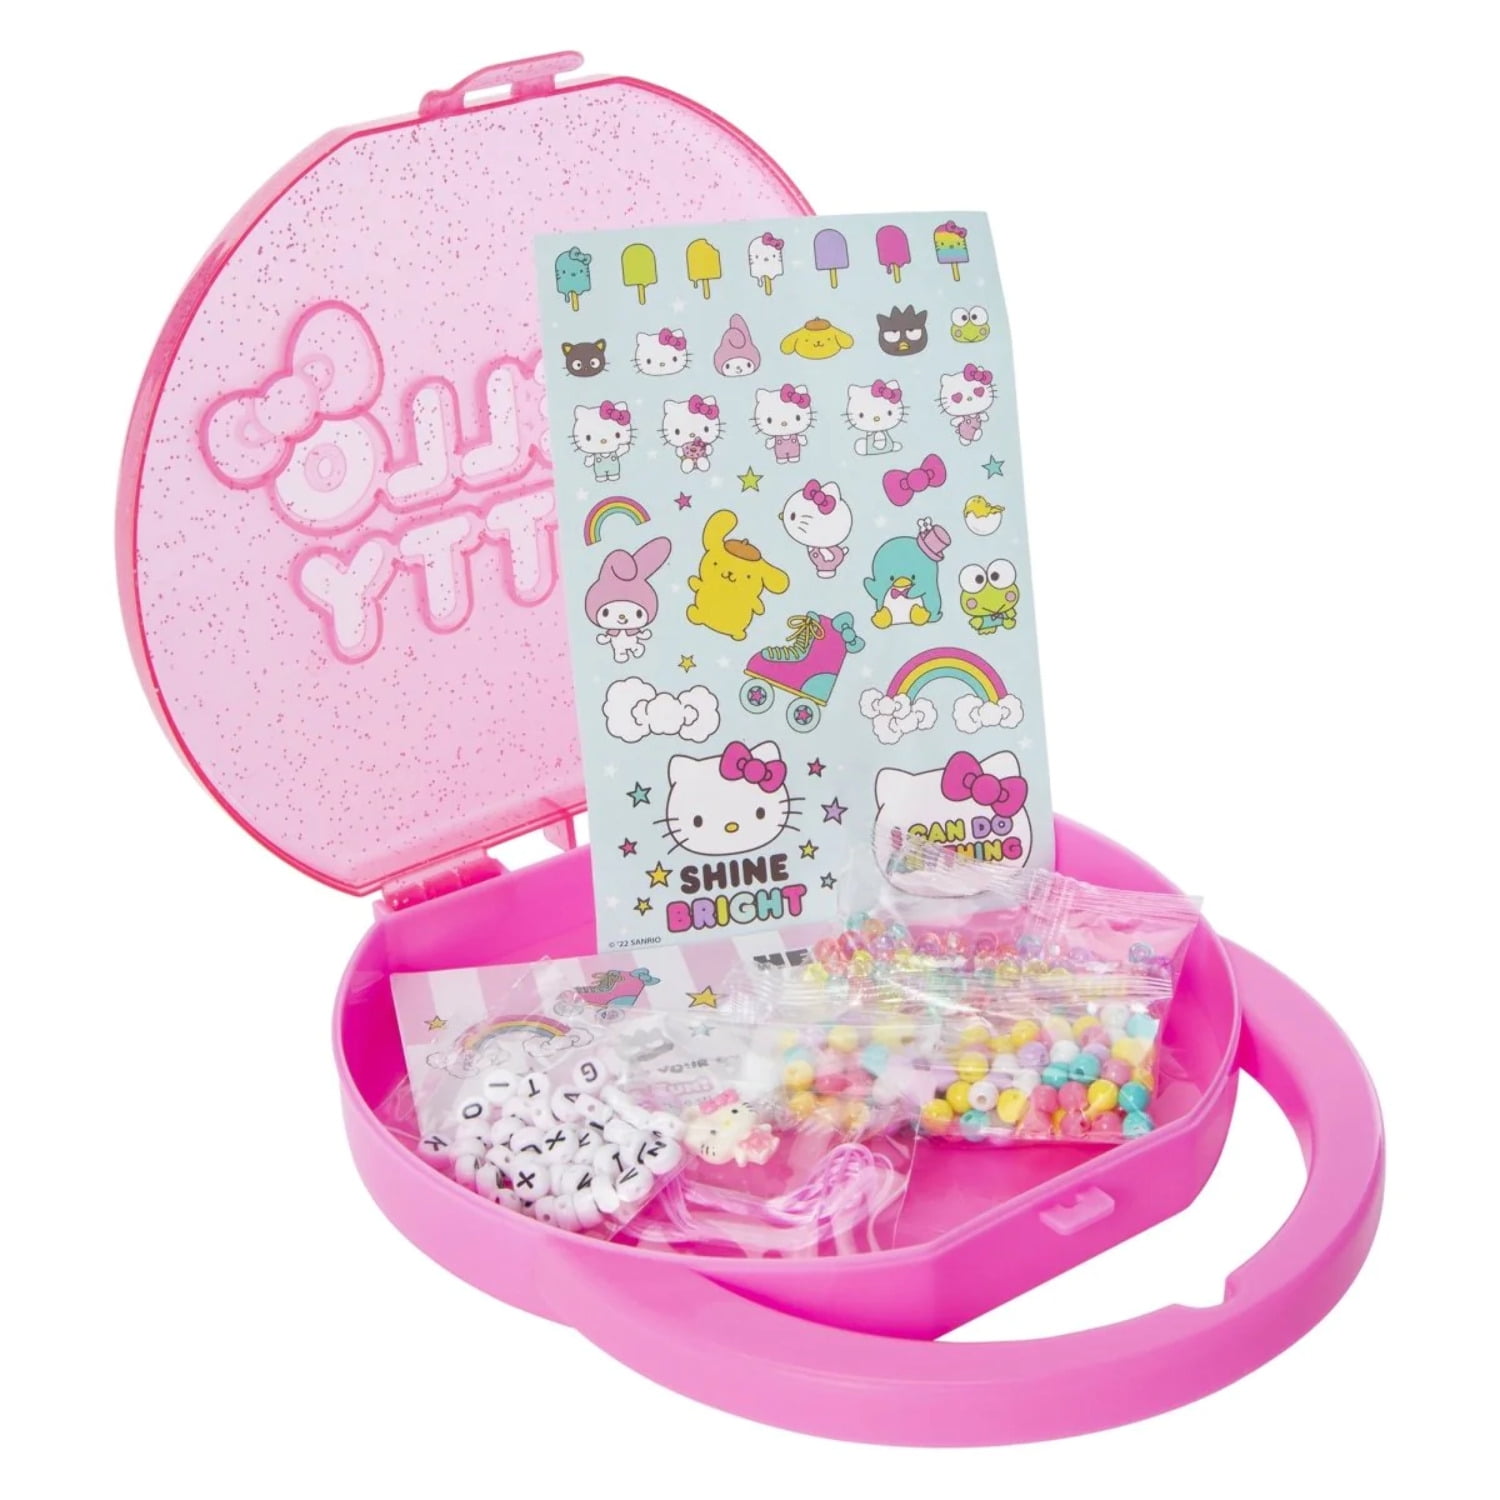 Hello Kitty Bead Party Jewelry Making Play Craft Kit Friendship